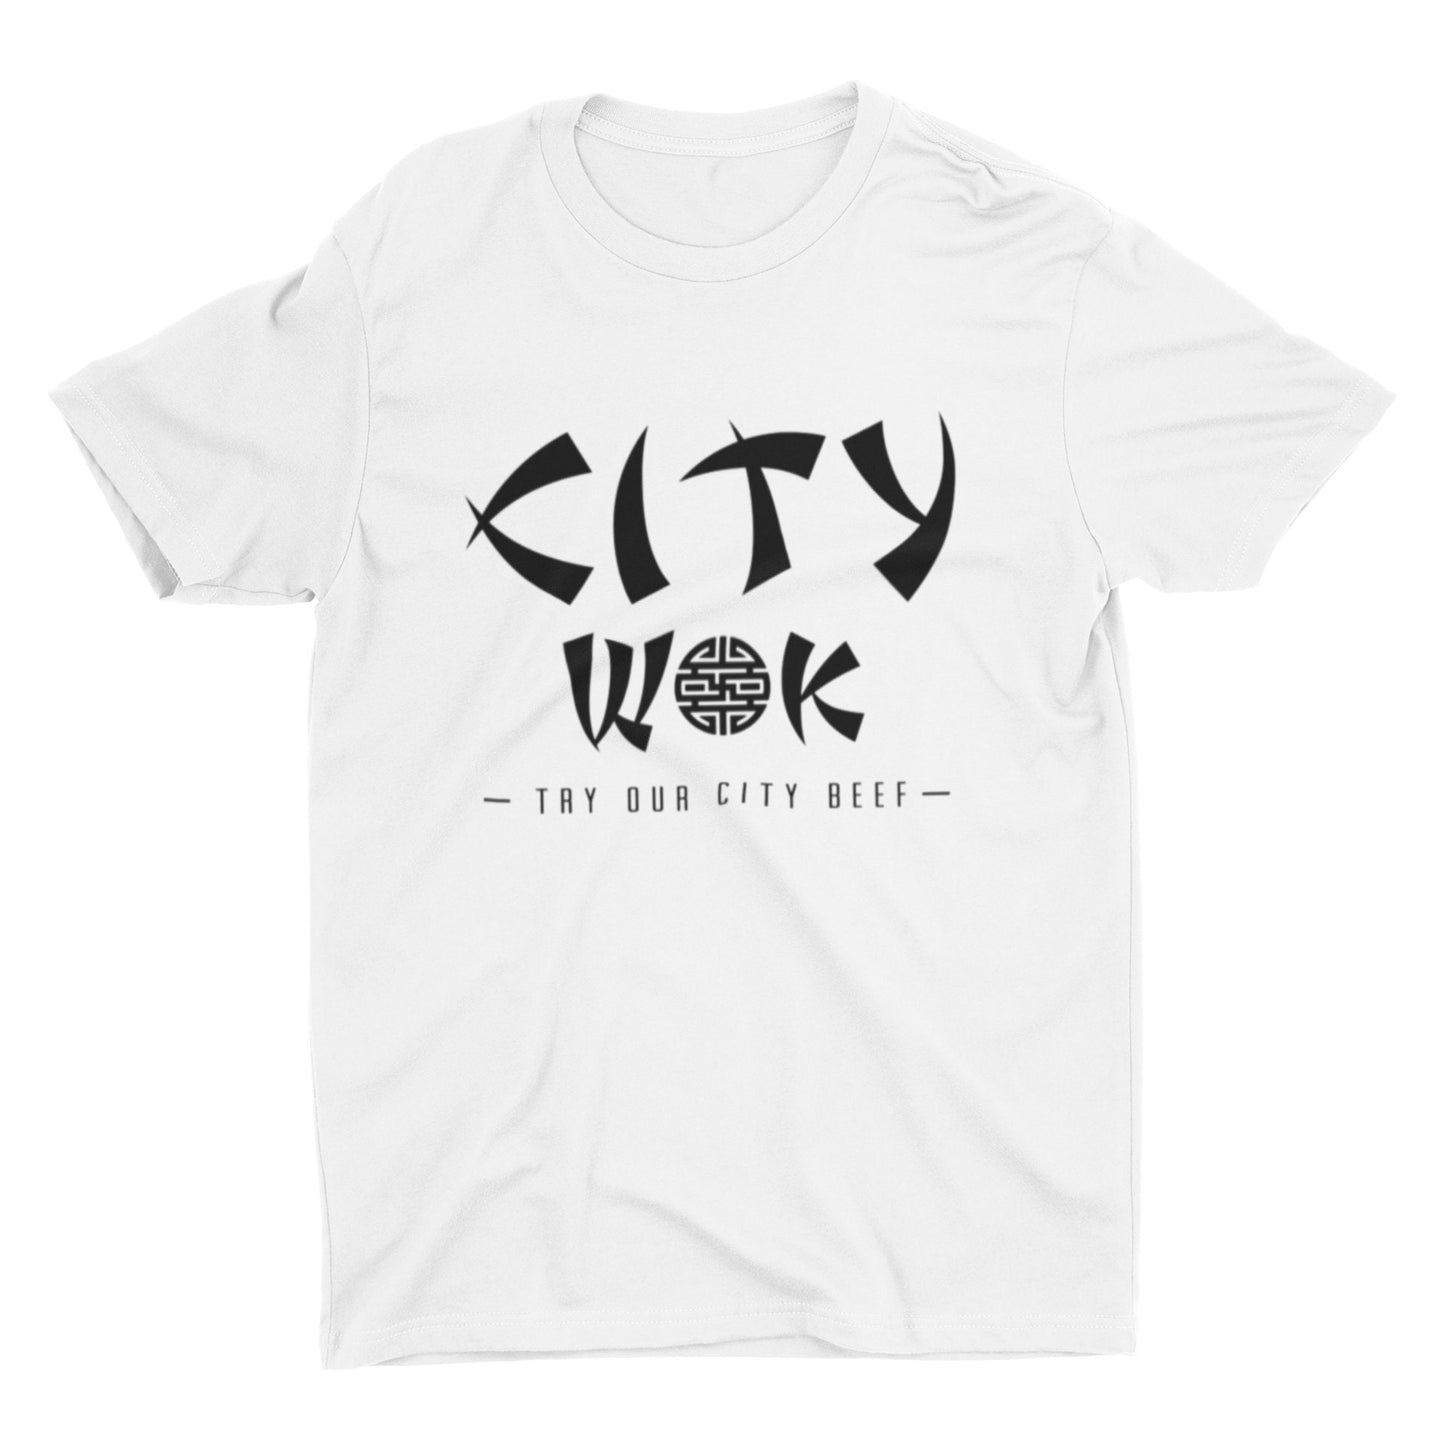 South Park City Wok T Shirt | Try Our City Beef South Park T Shirt | City Wok | South Park Funny T Shirt